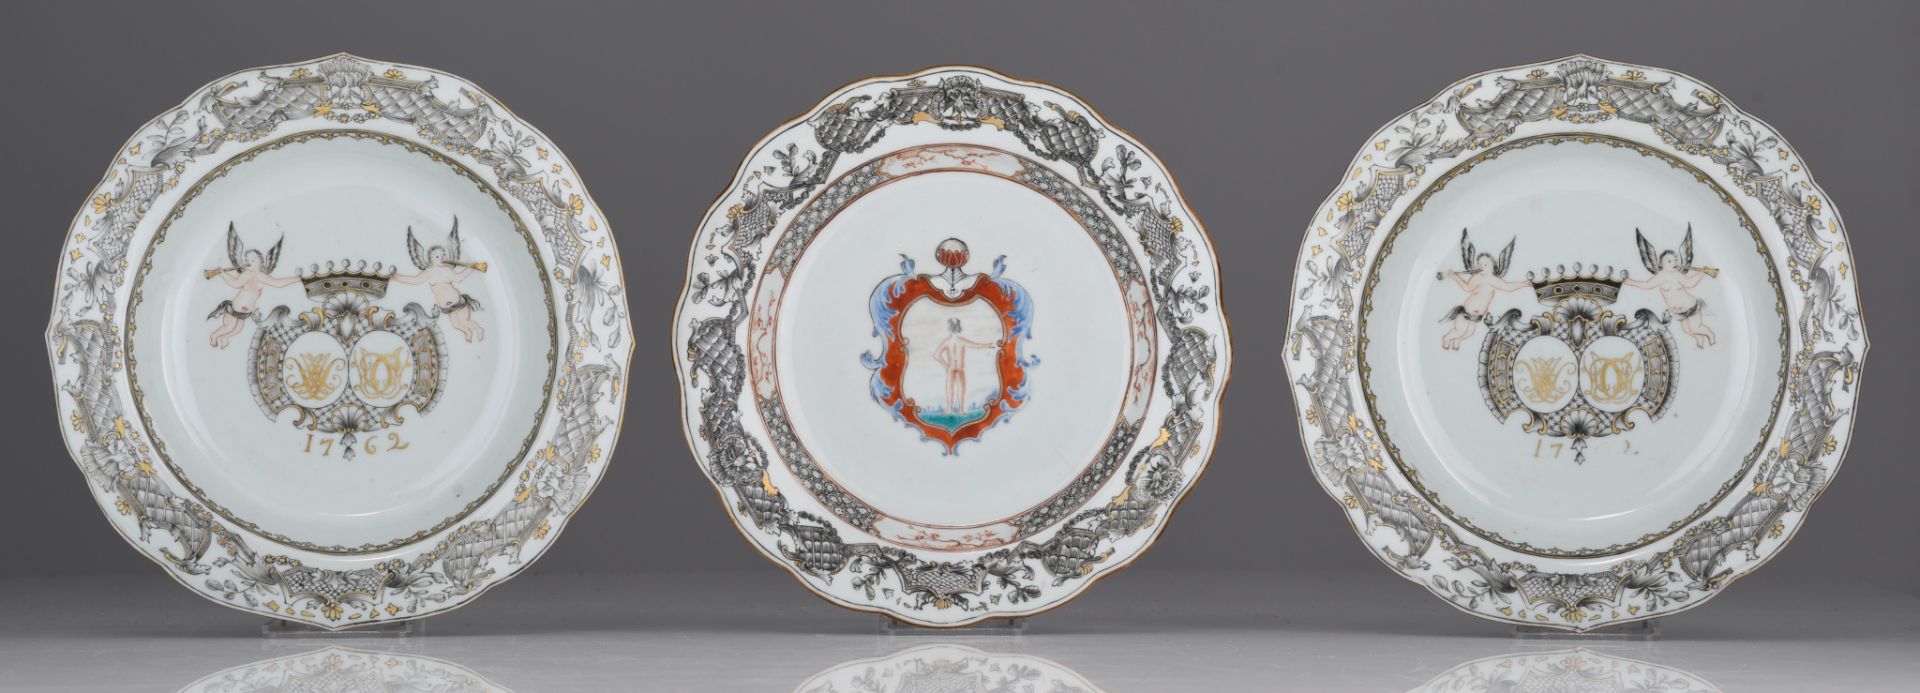 (BIDDING ONLY ON CARLOBONTE.BE) Three Chinese 'en grisaille', famille rose and gilt pseudo-armorial - Image 2 of 6